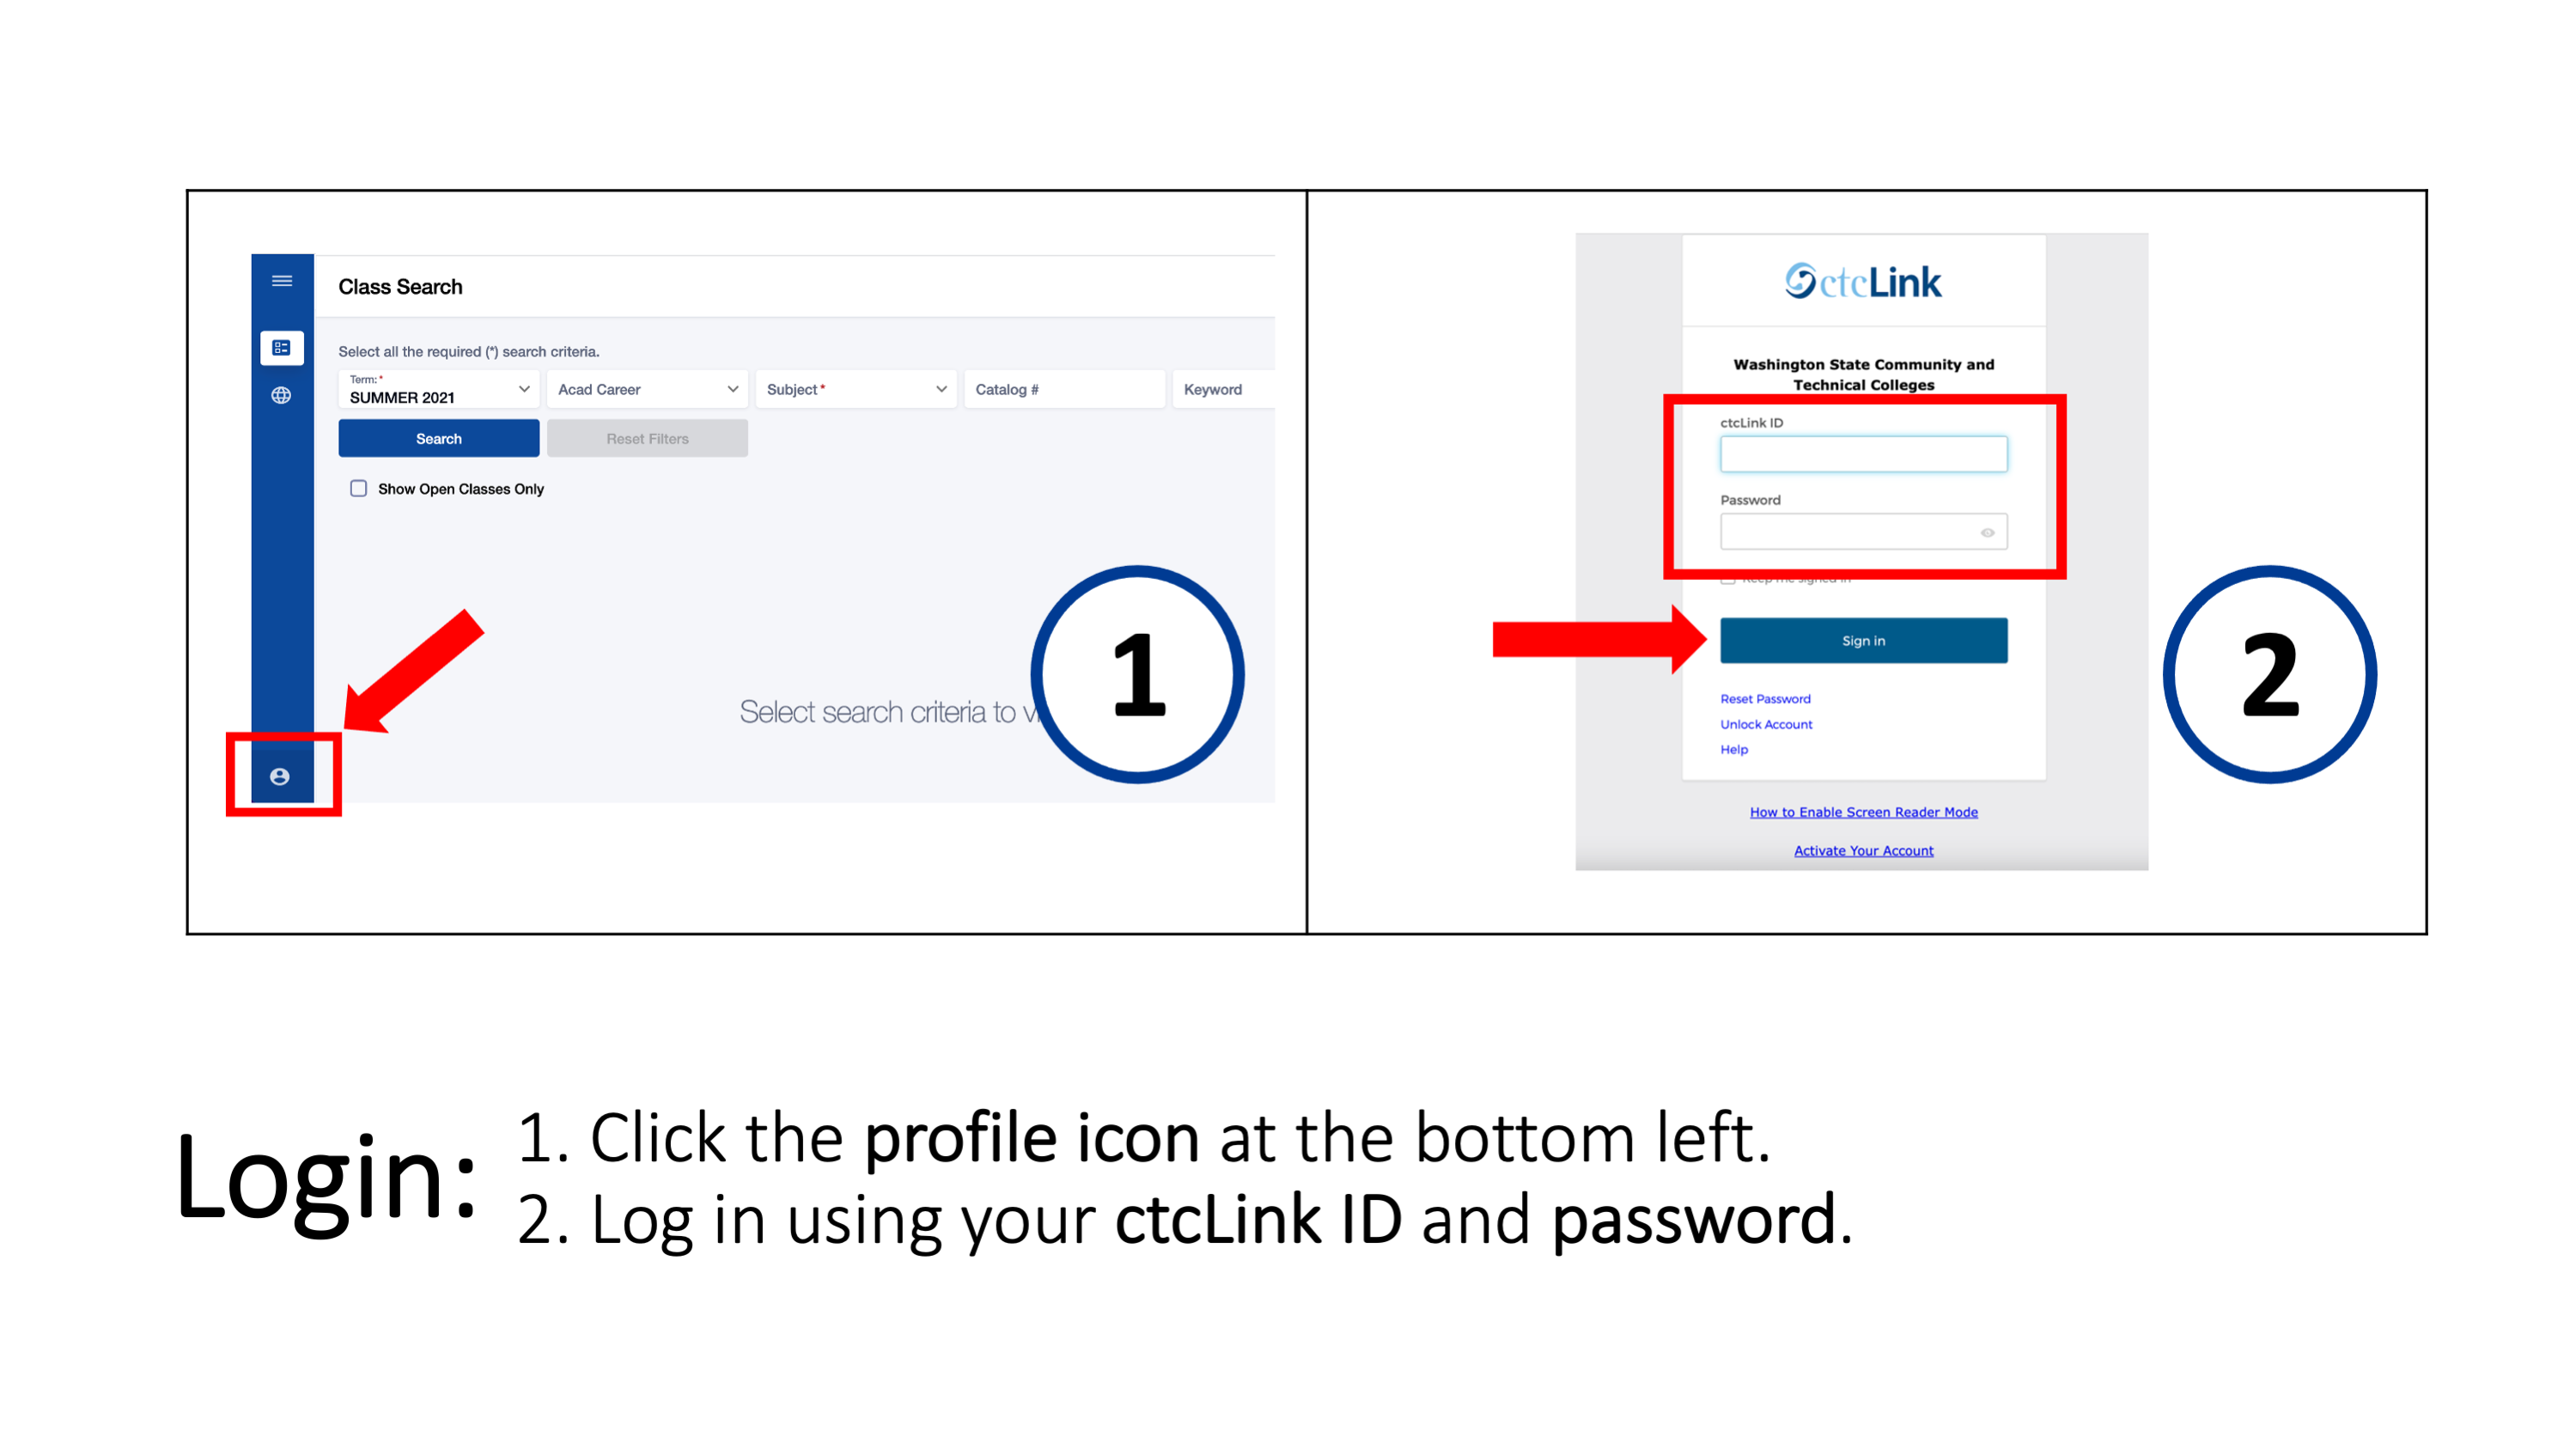 Login: 1. Click the profile icon at the bottom left. 2. Log in using your ctcLink ID and password.